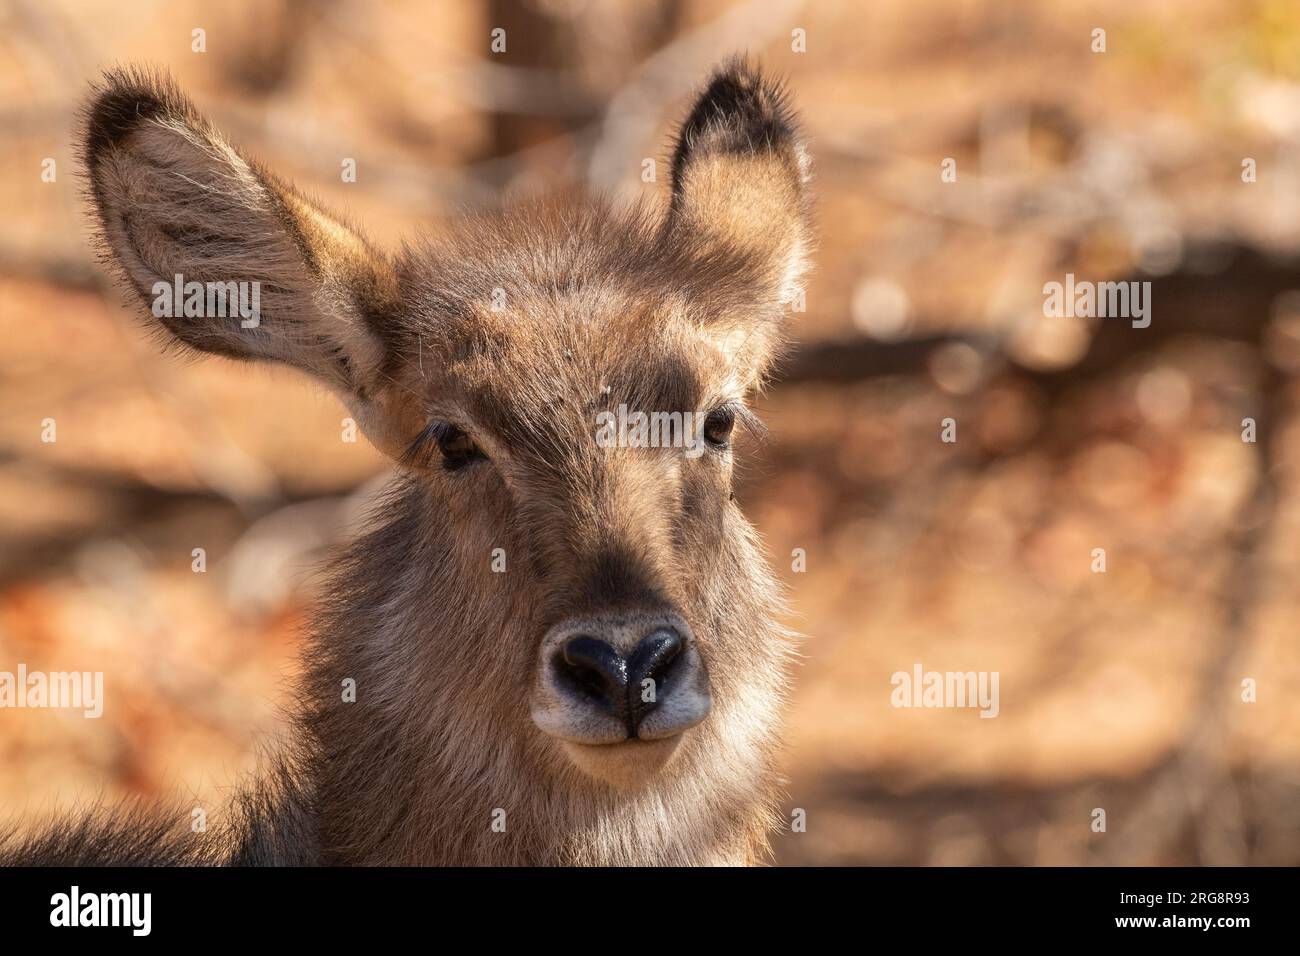 A close up image of the head of a female waterbuck in the Kruger National Park, South Africa Stock Photo